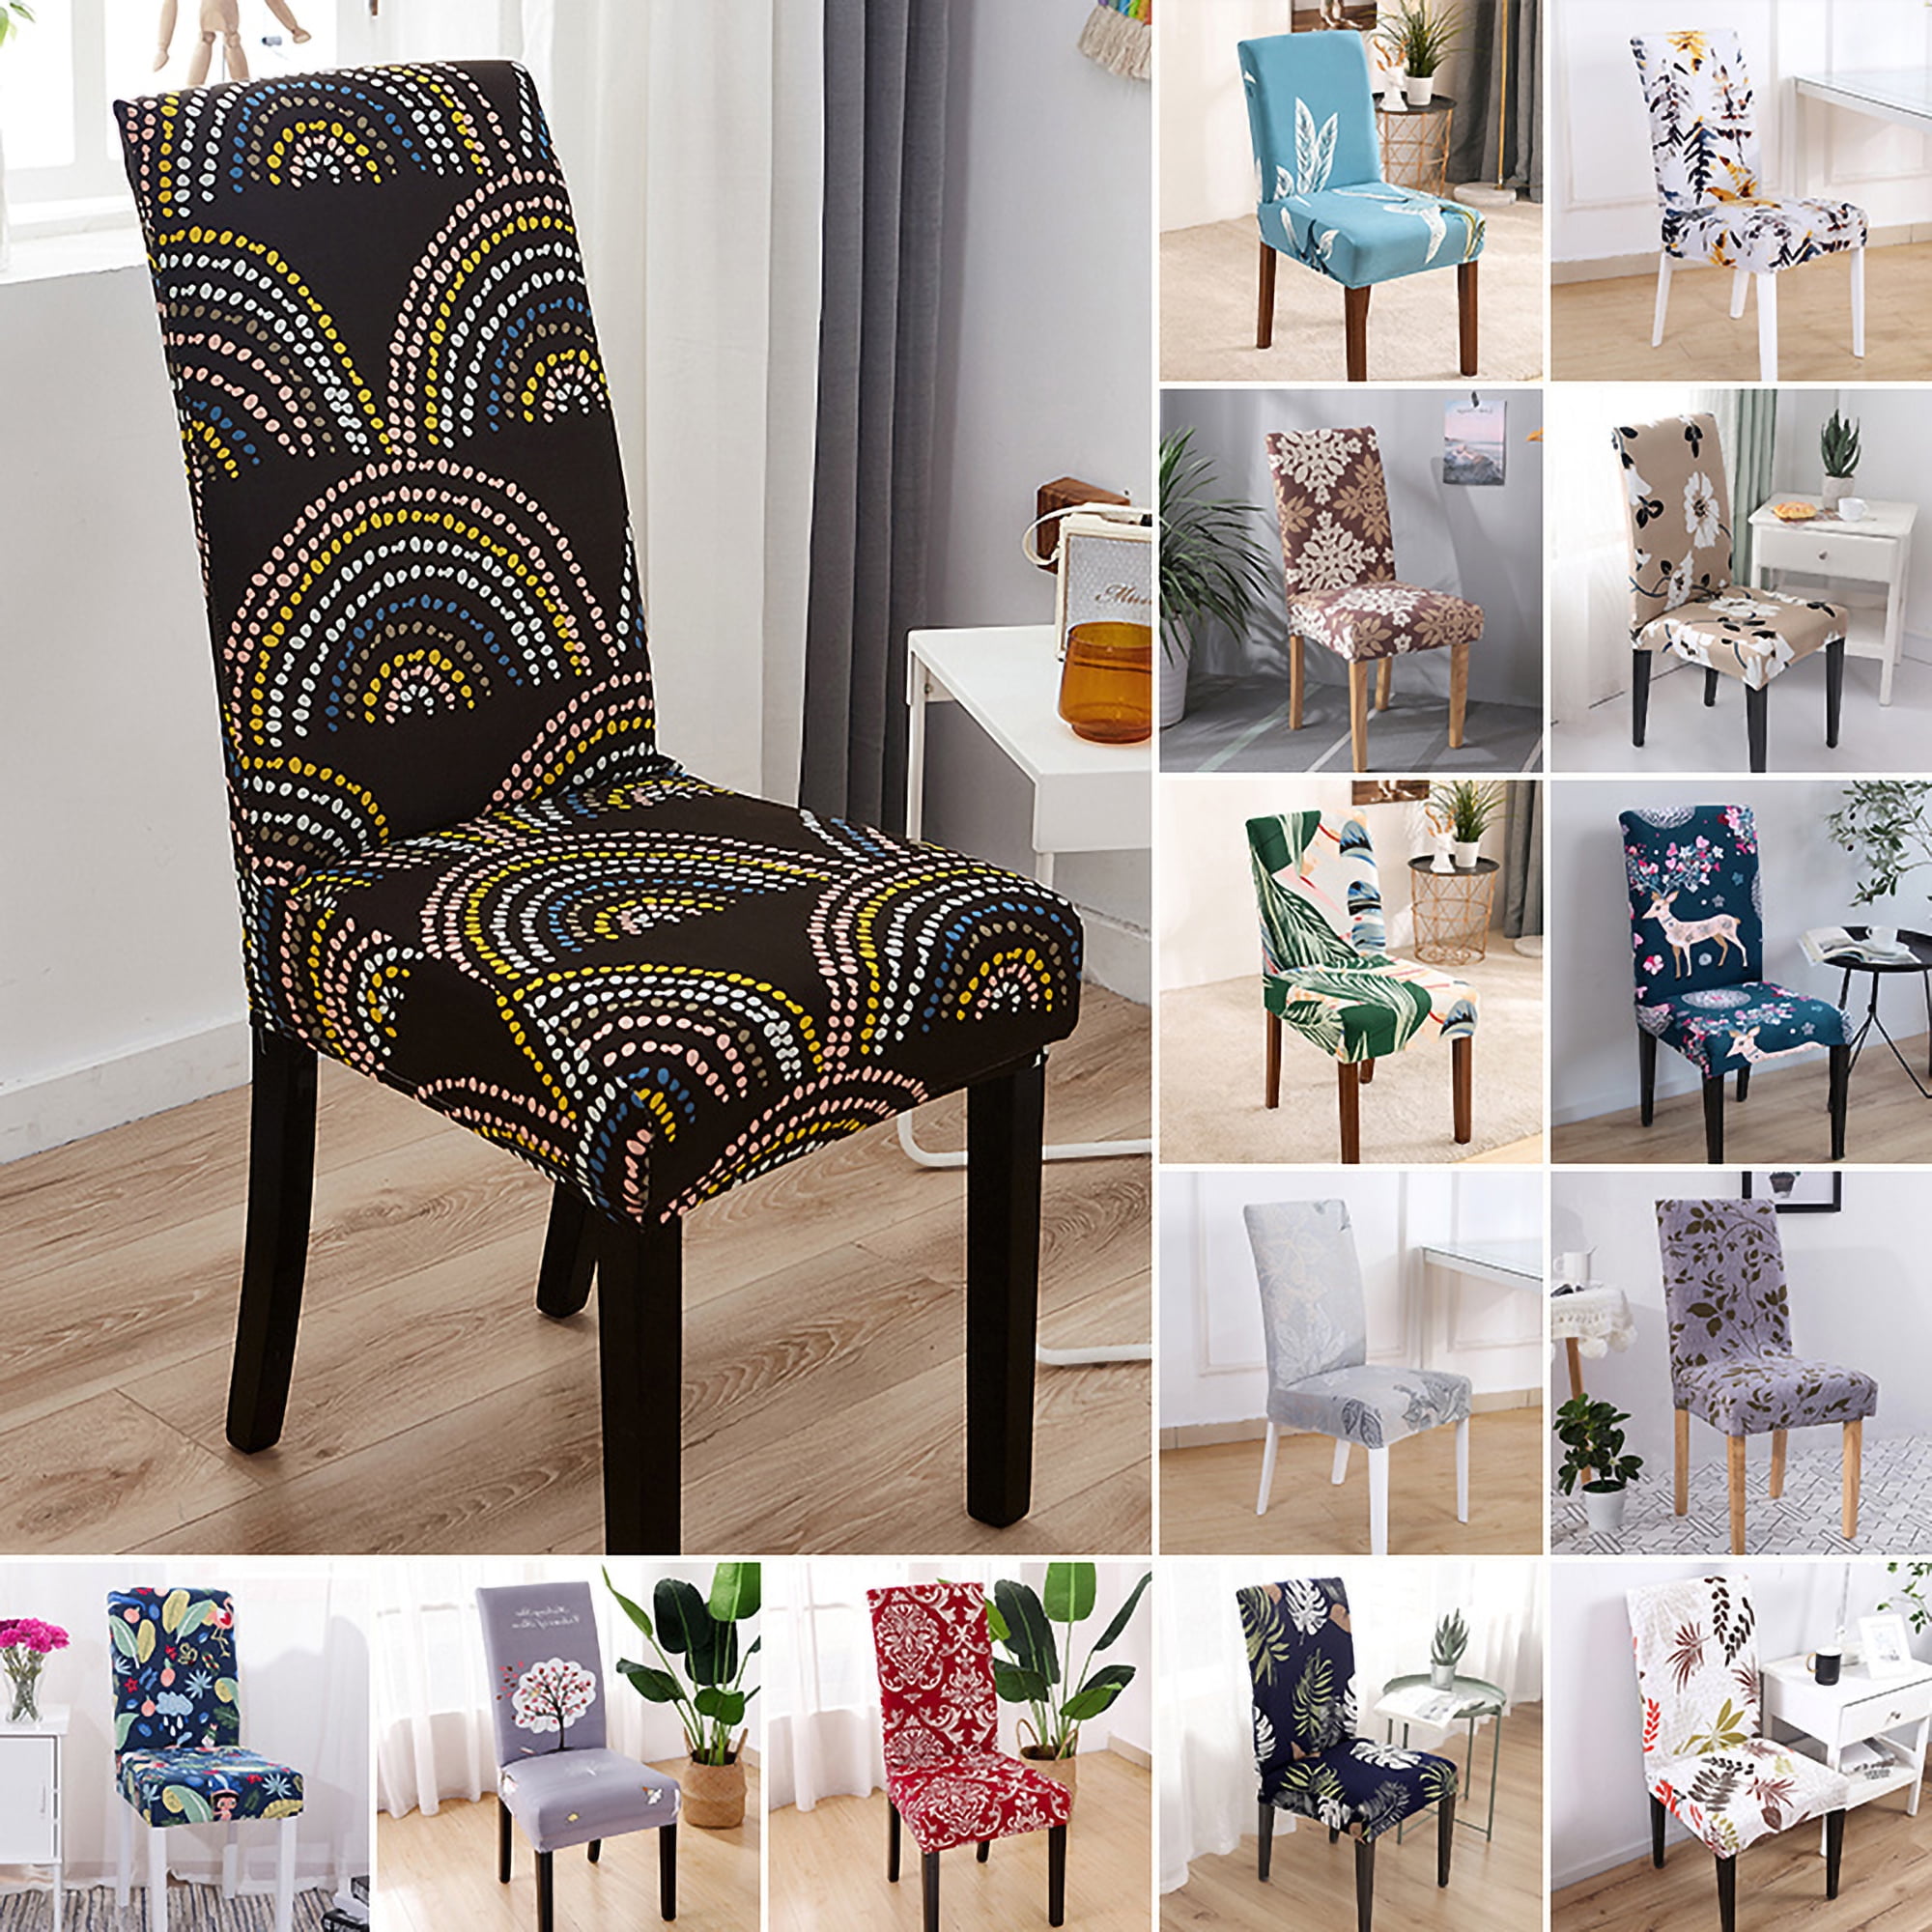 New Removable Stretch Chair Covers Slipcovers Dining Room Chair Cover Decor. 